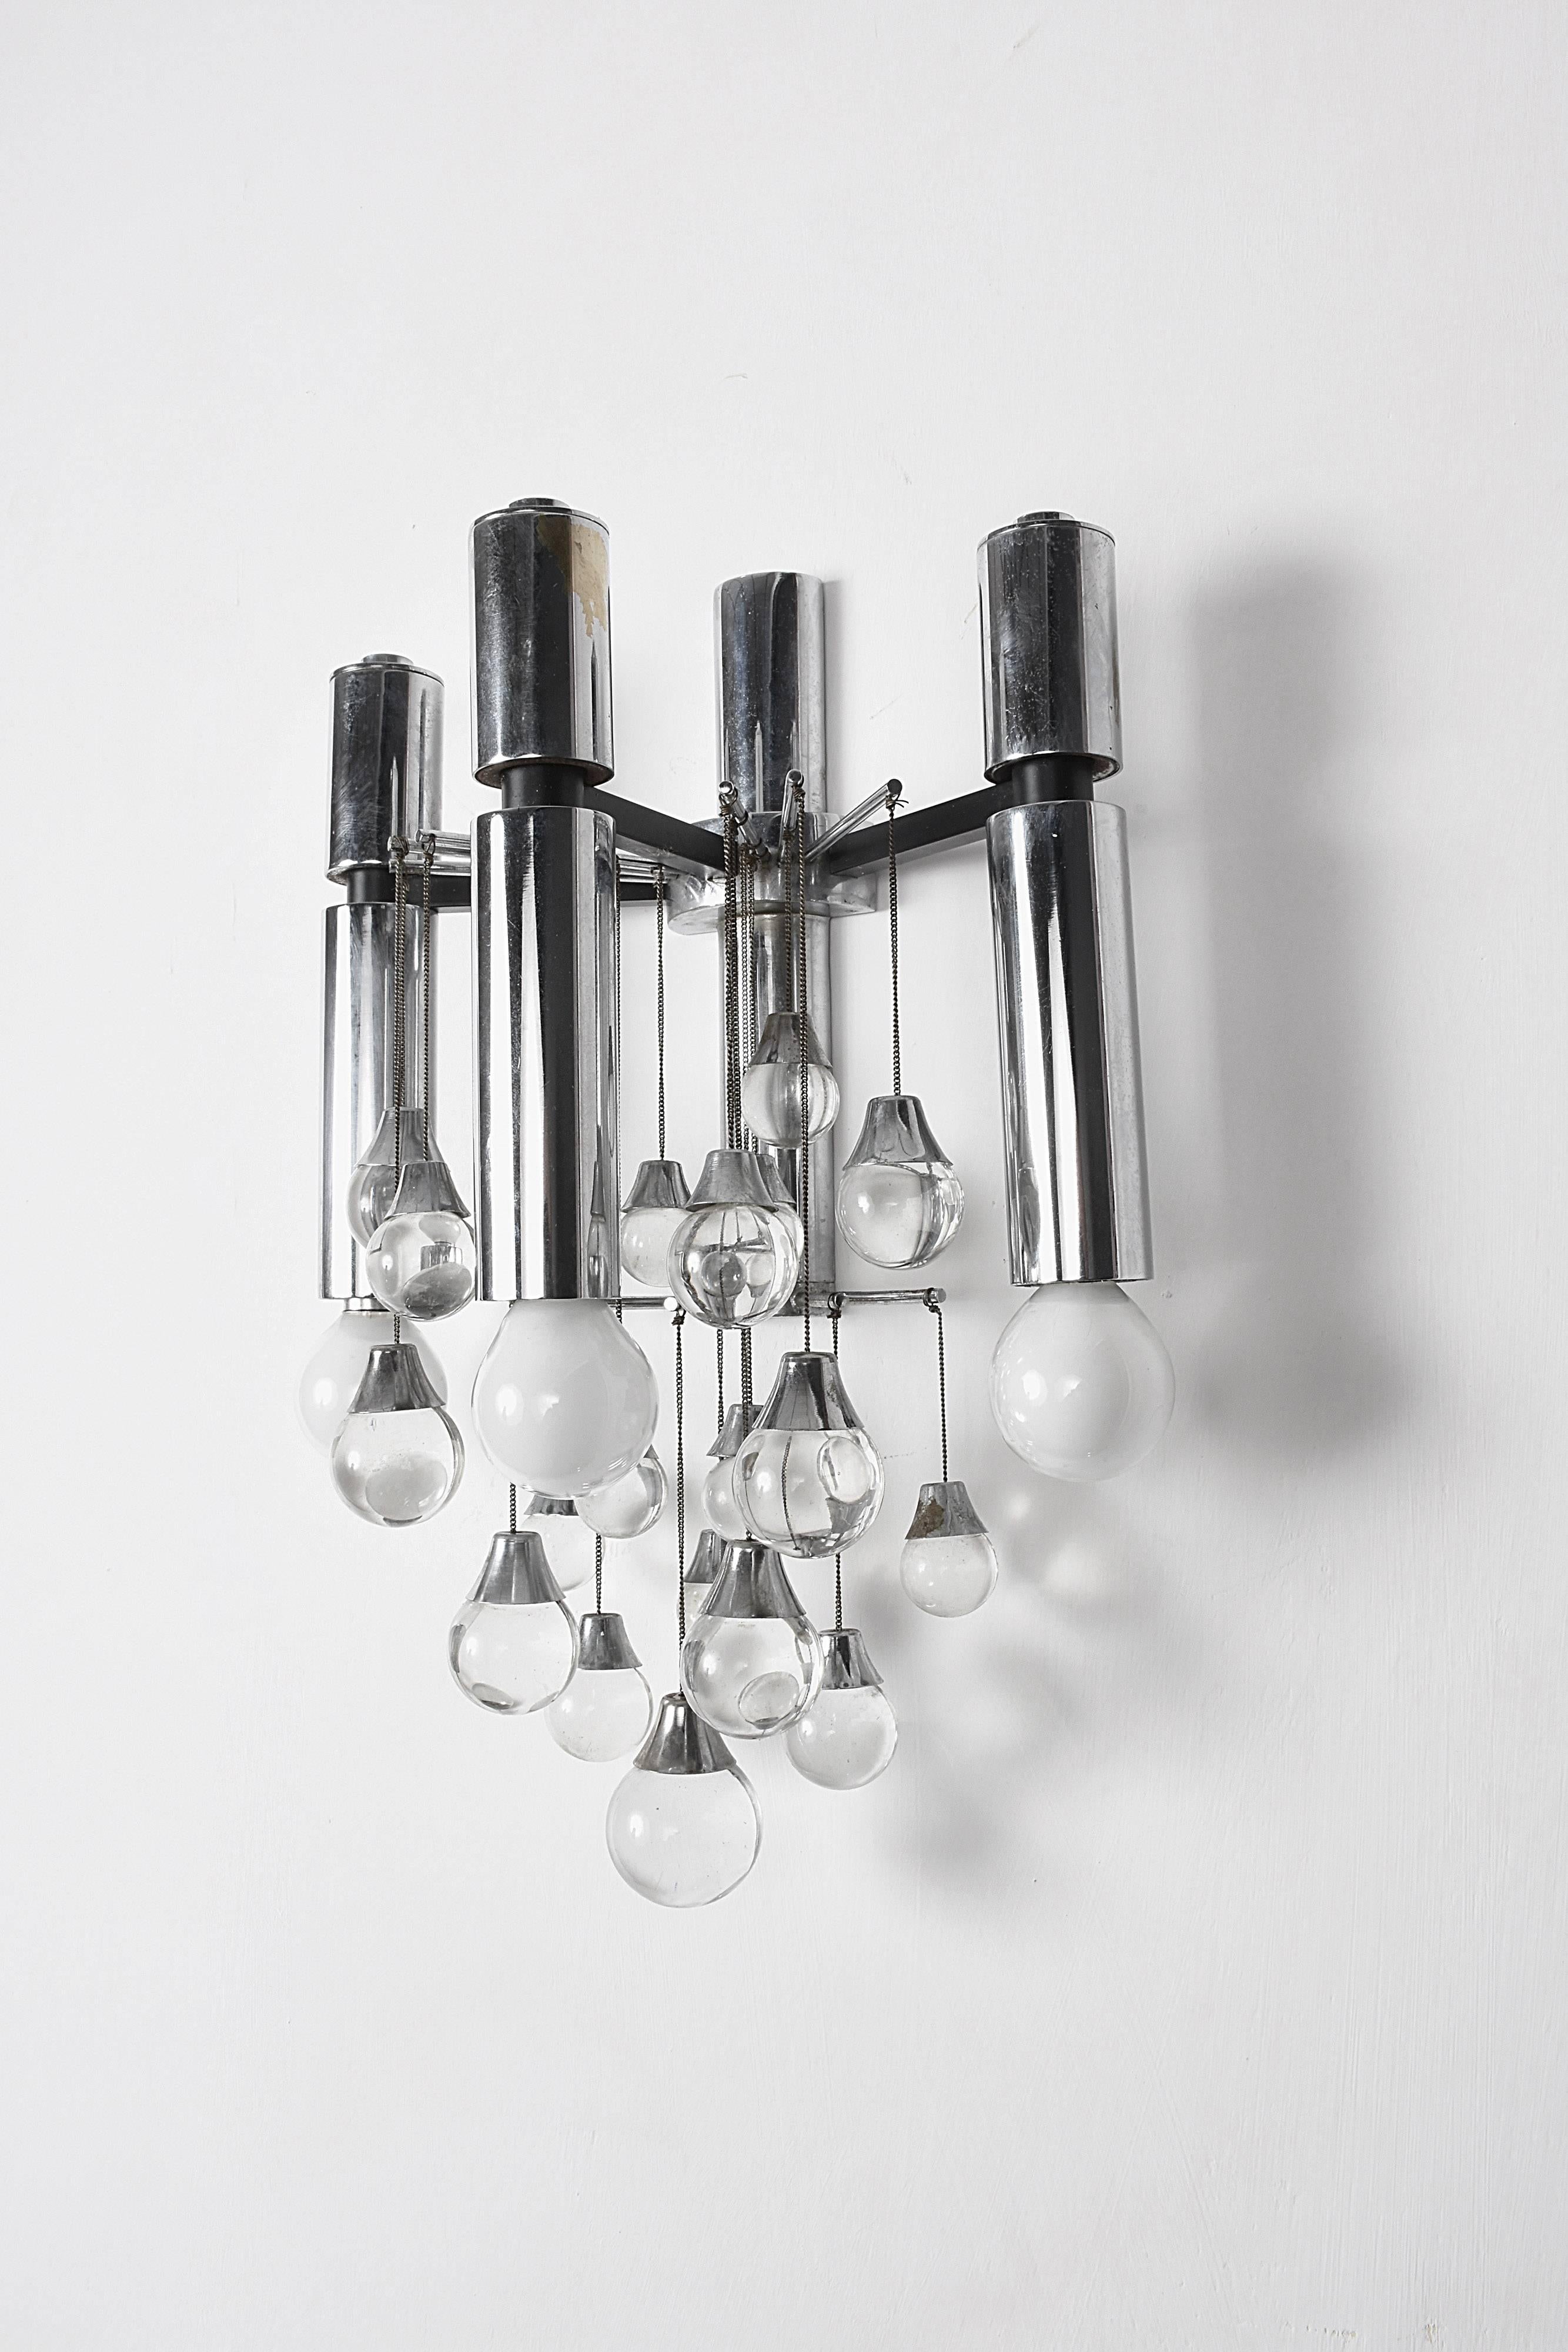 Pair of Sciolari Chrome and Glass Italian Sconces with Three Lights, 1960s For Sale 2